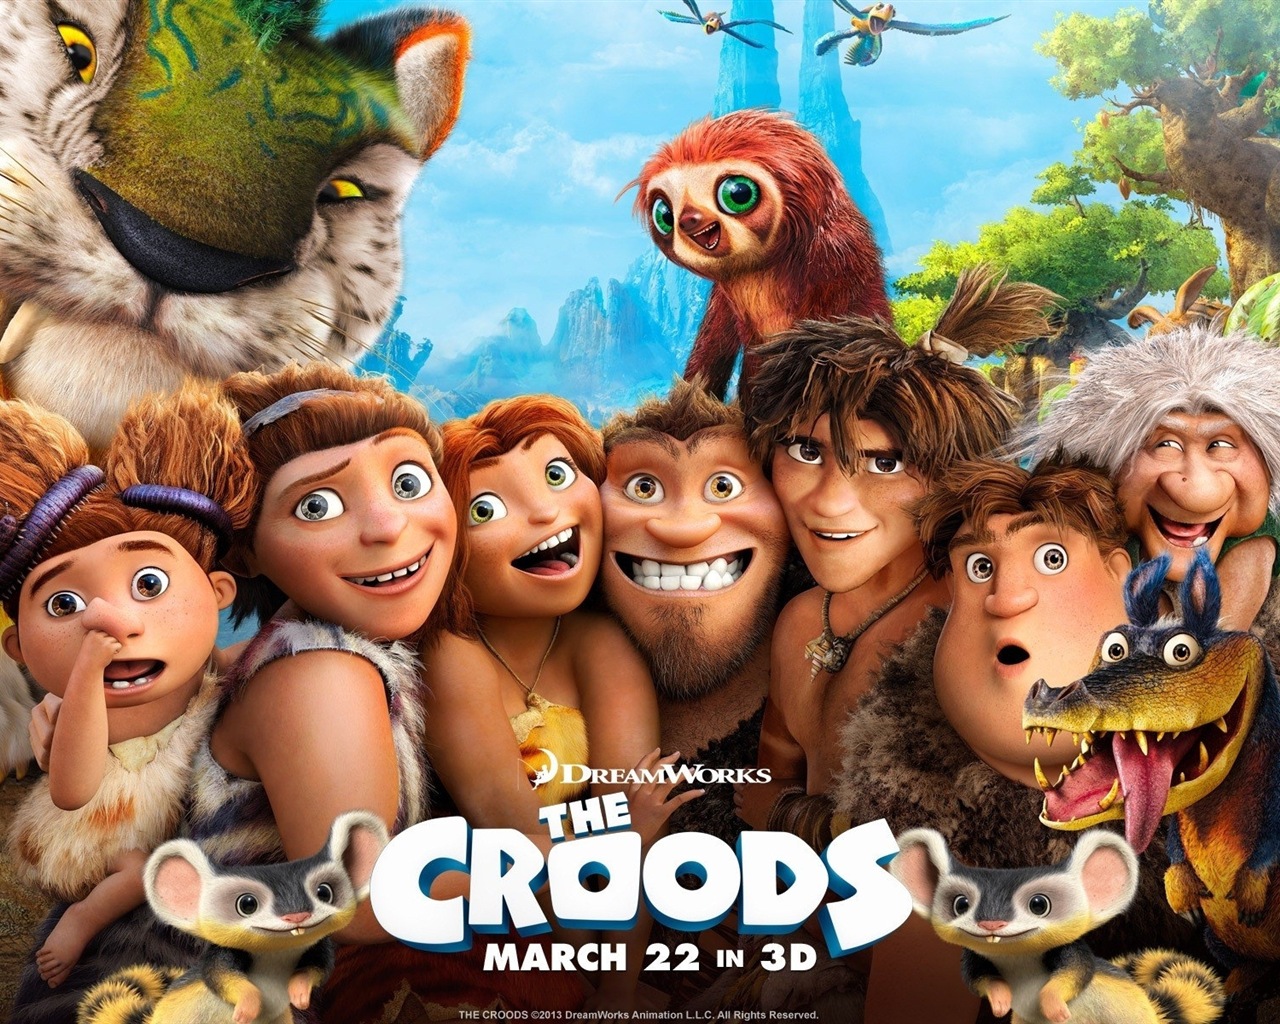 The Croods HD movie wallpapers #1 - 1280x1024